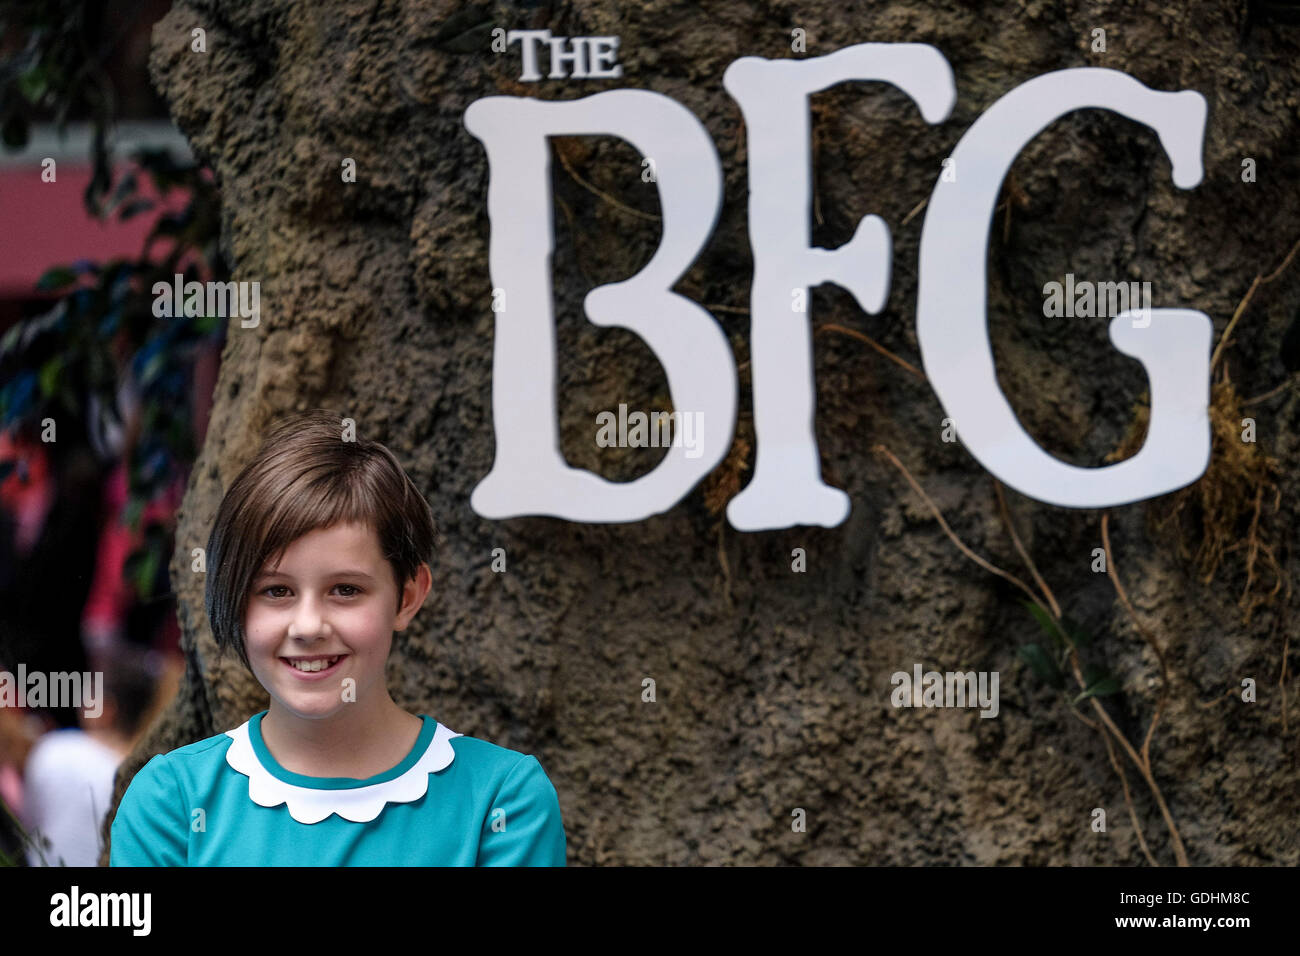 UK premiere of THE BFG on 17/07/2016 at ODEON Leicester Square, London. Pictured: Ruby Barnhill. Picture by Julie Edwards Stock Photo